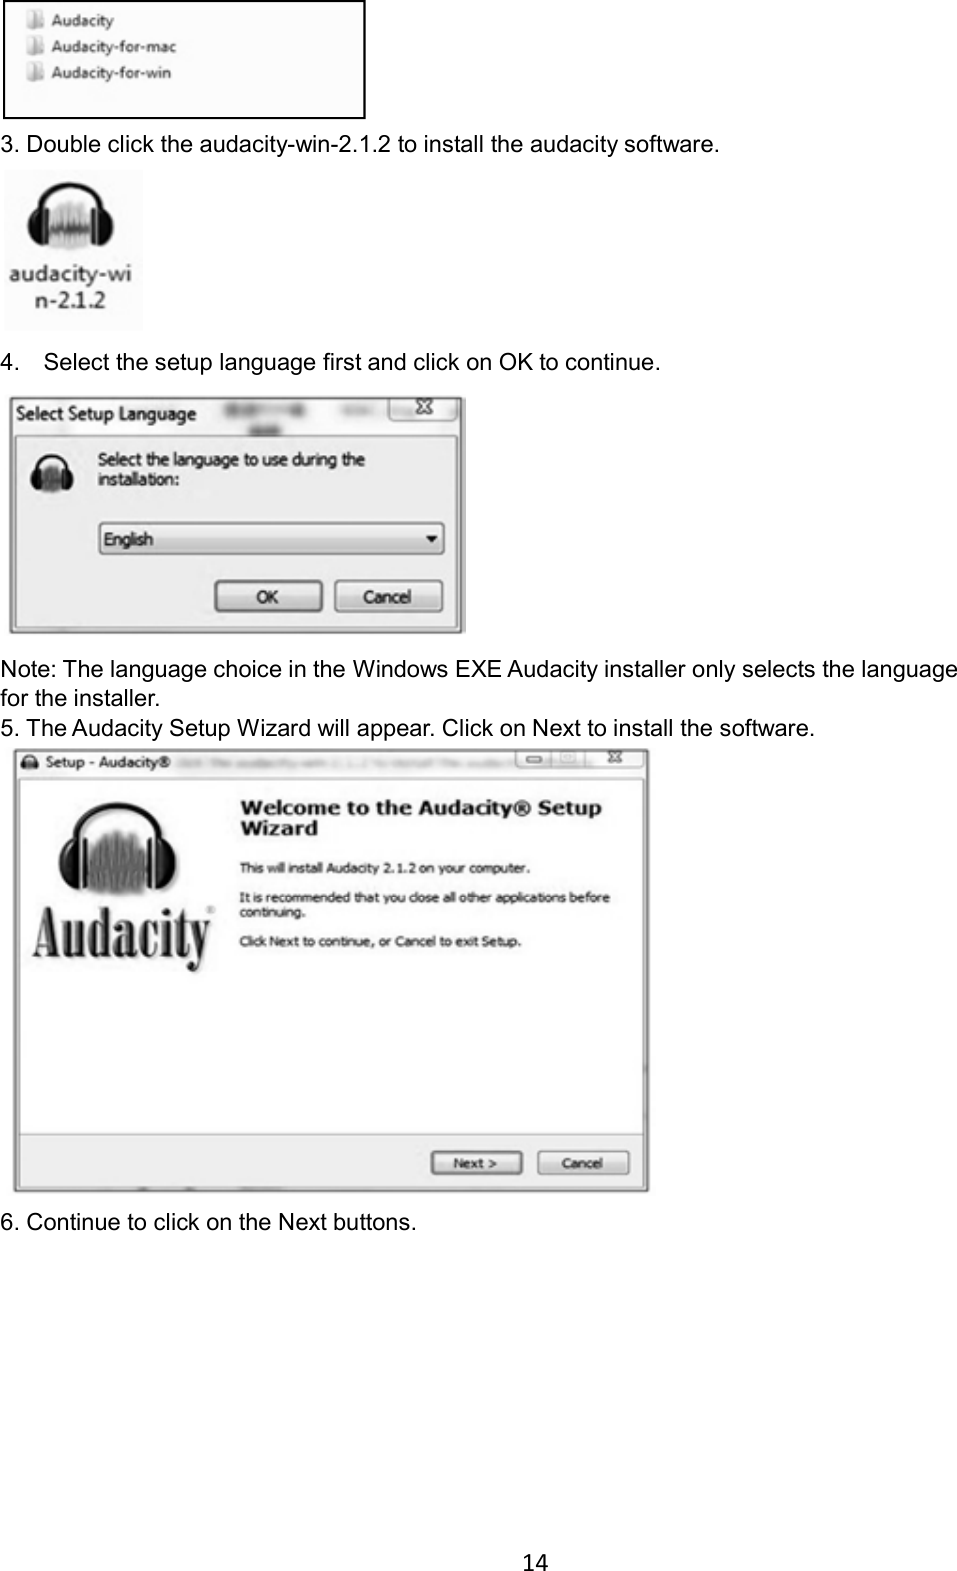 14     3. Double click the audacity-win-2.1.2 to install the audacity software.    4.    Select the setup language first and click on OK to continue.    Note: The language choice in the Windows EXE Audacity installer only selects the language for the installer. 5. The Audacity Setup Wizard will appear. Click on Next to install the software.    6. Continue to click on the Next buttons. 